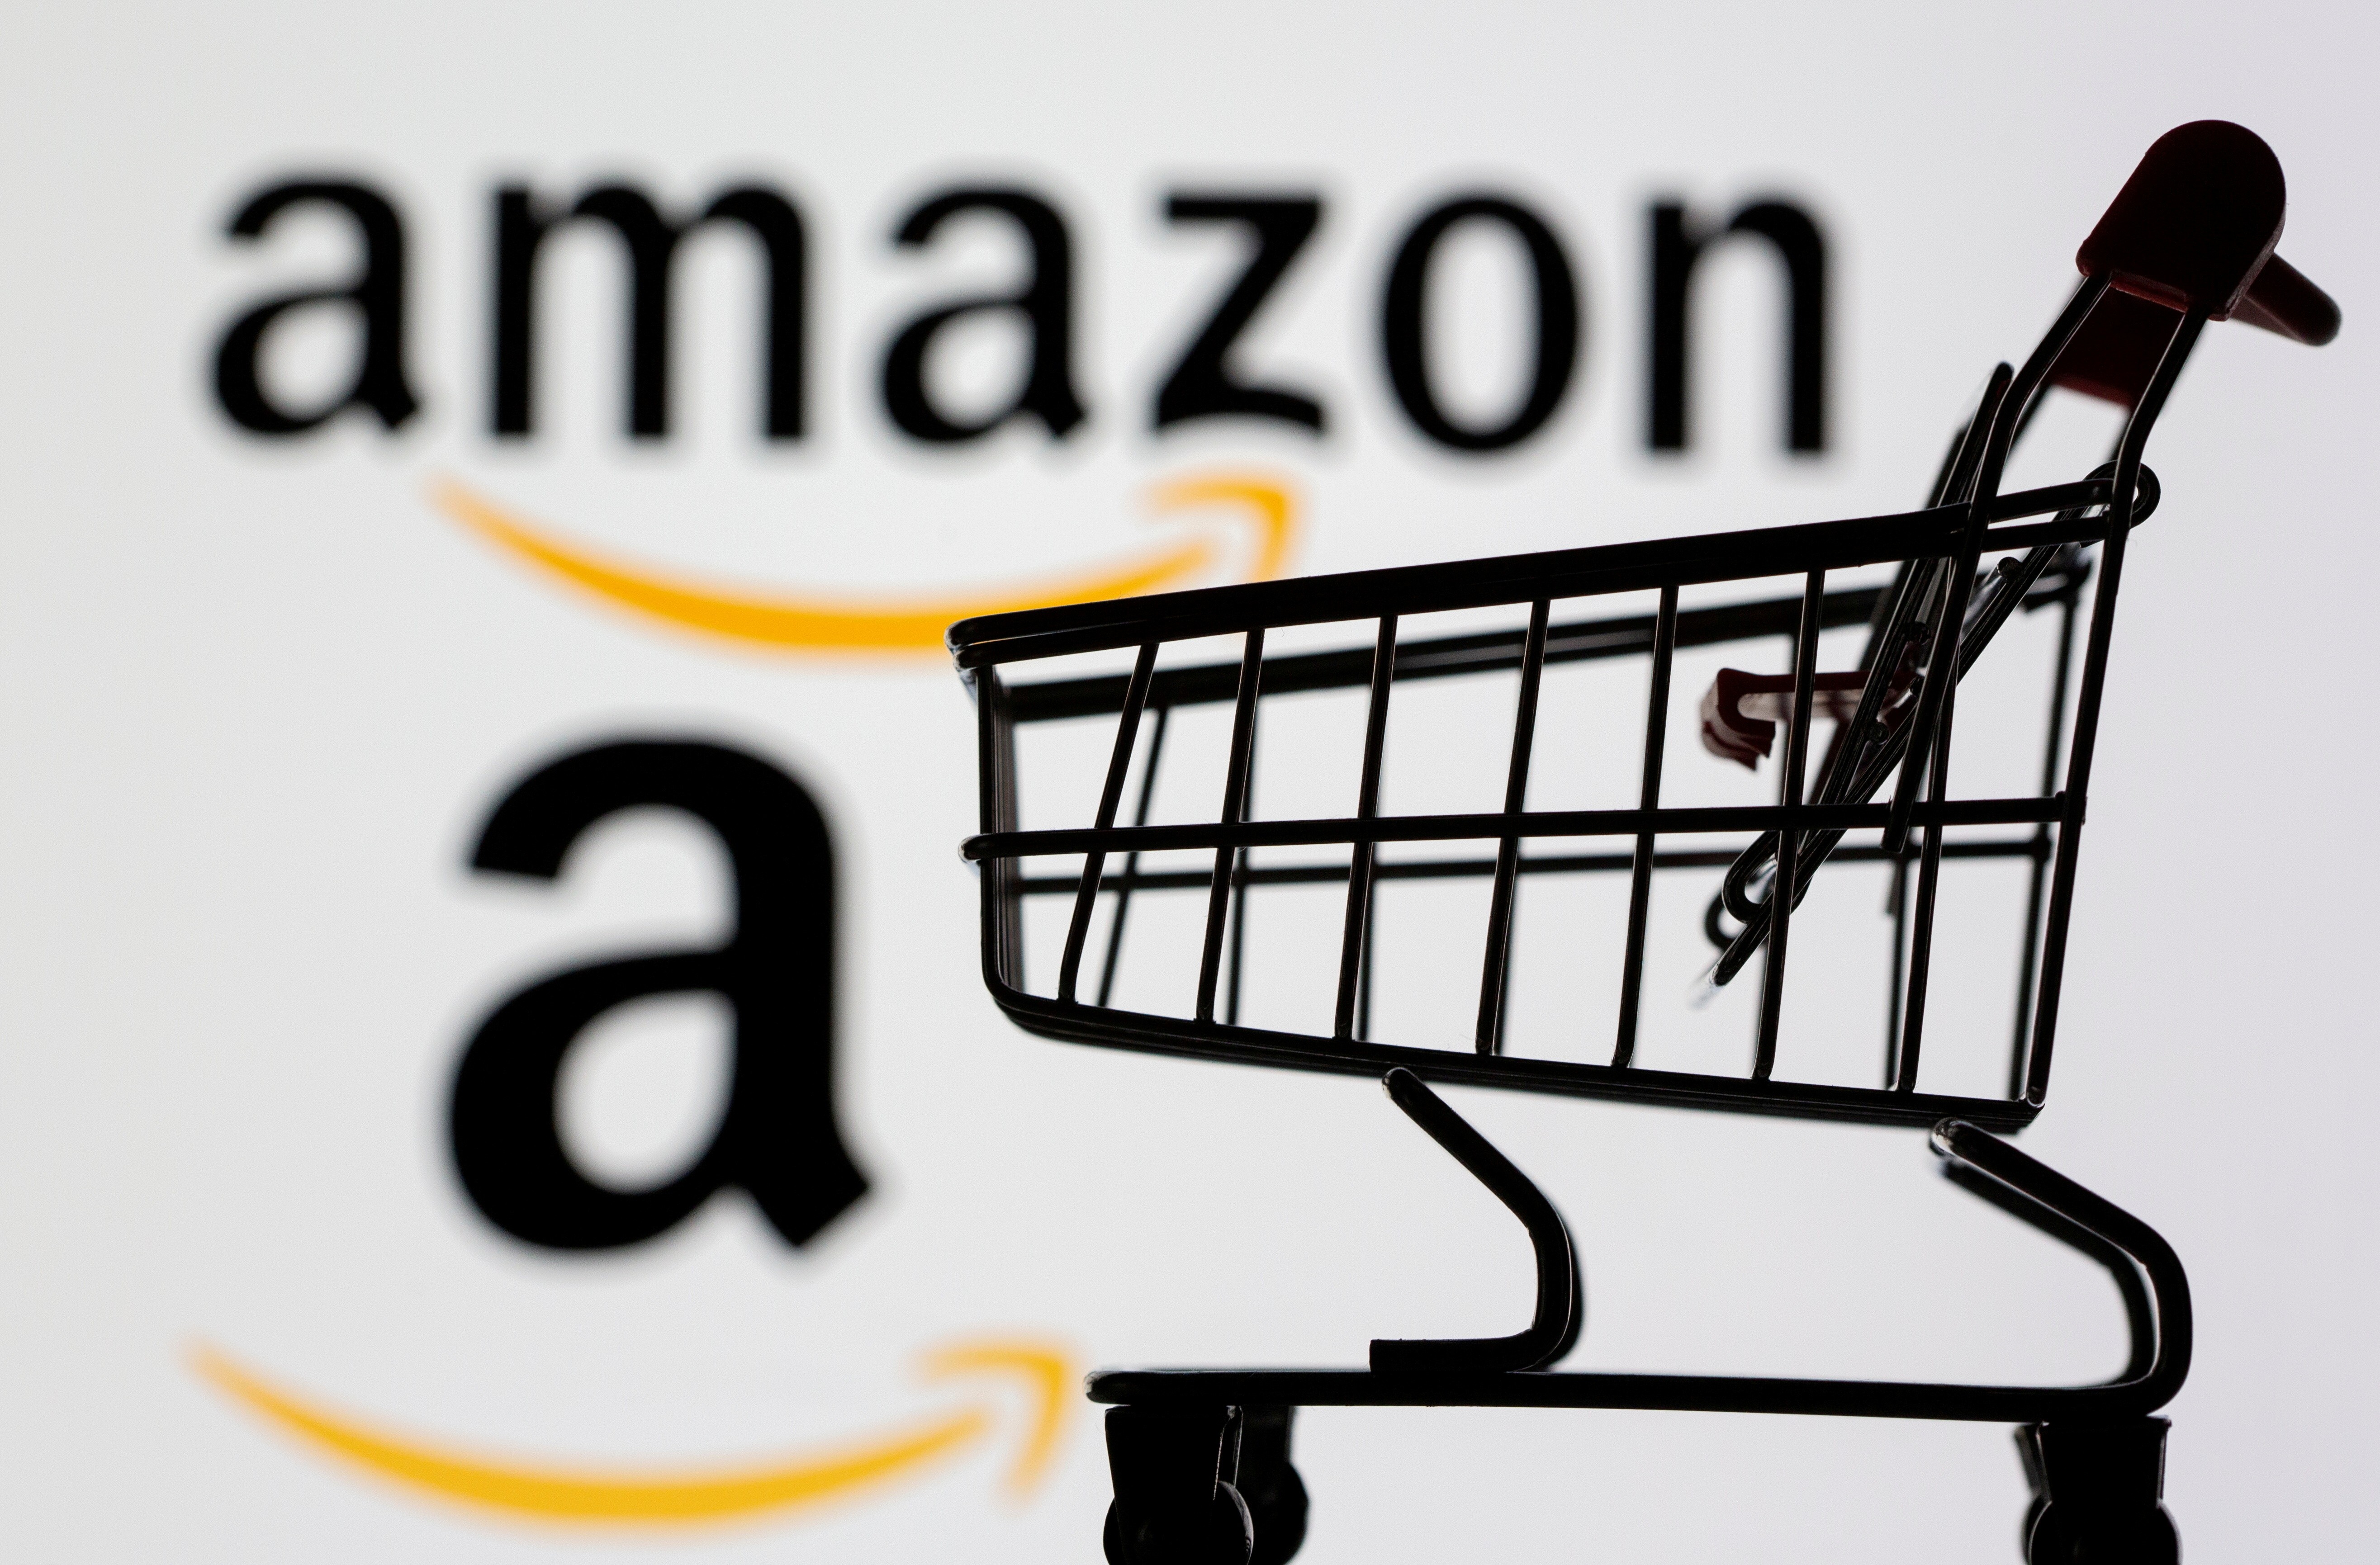 Amazon.com says its crackdown on consumer review abuses is not intended to target merchants from China or any other country. Photo: Reuters